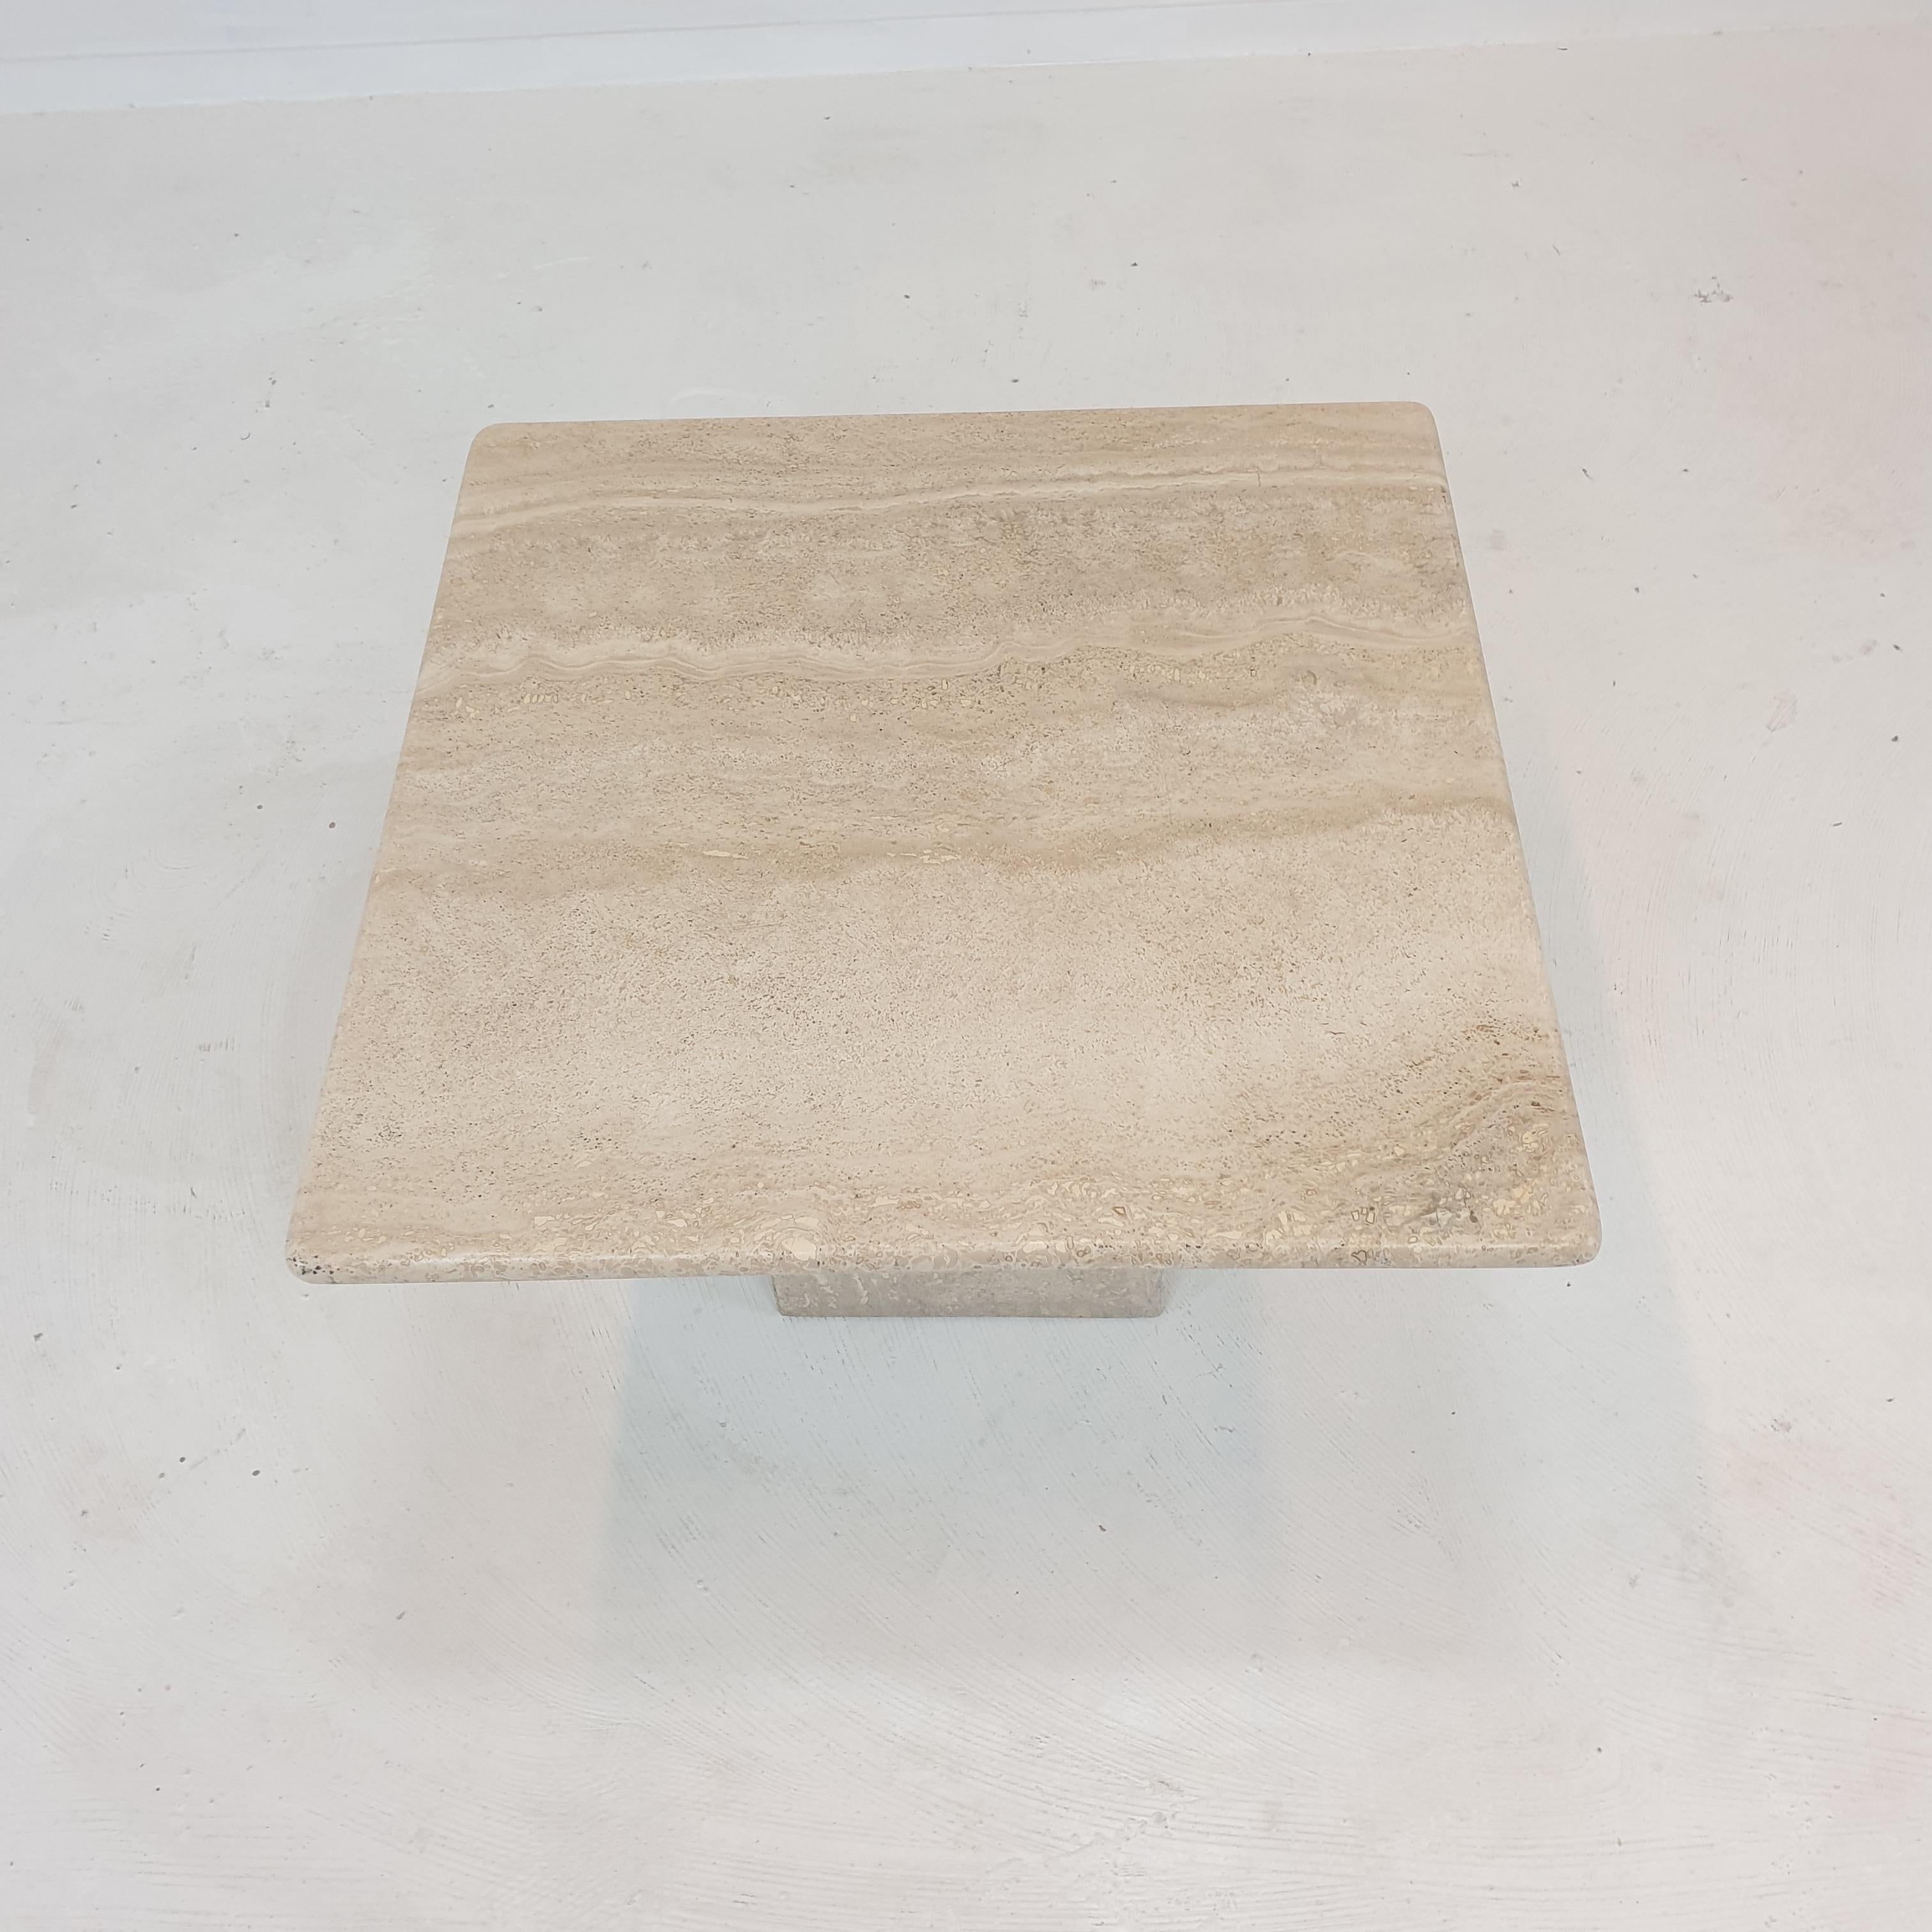 Hand-Crafted Italian Travertine Coffee Table, 1980's For Sale